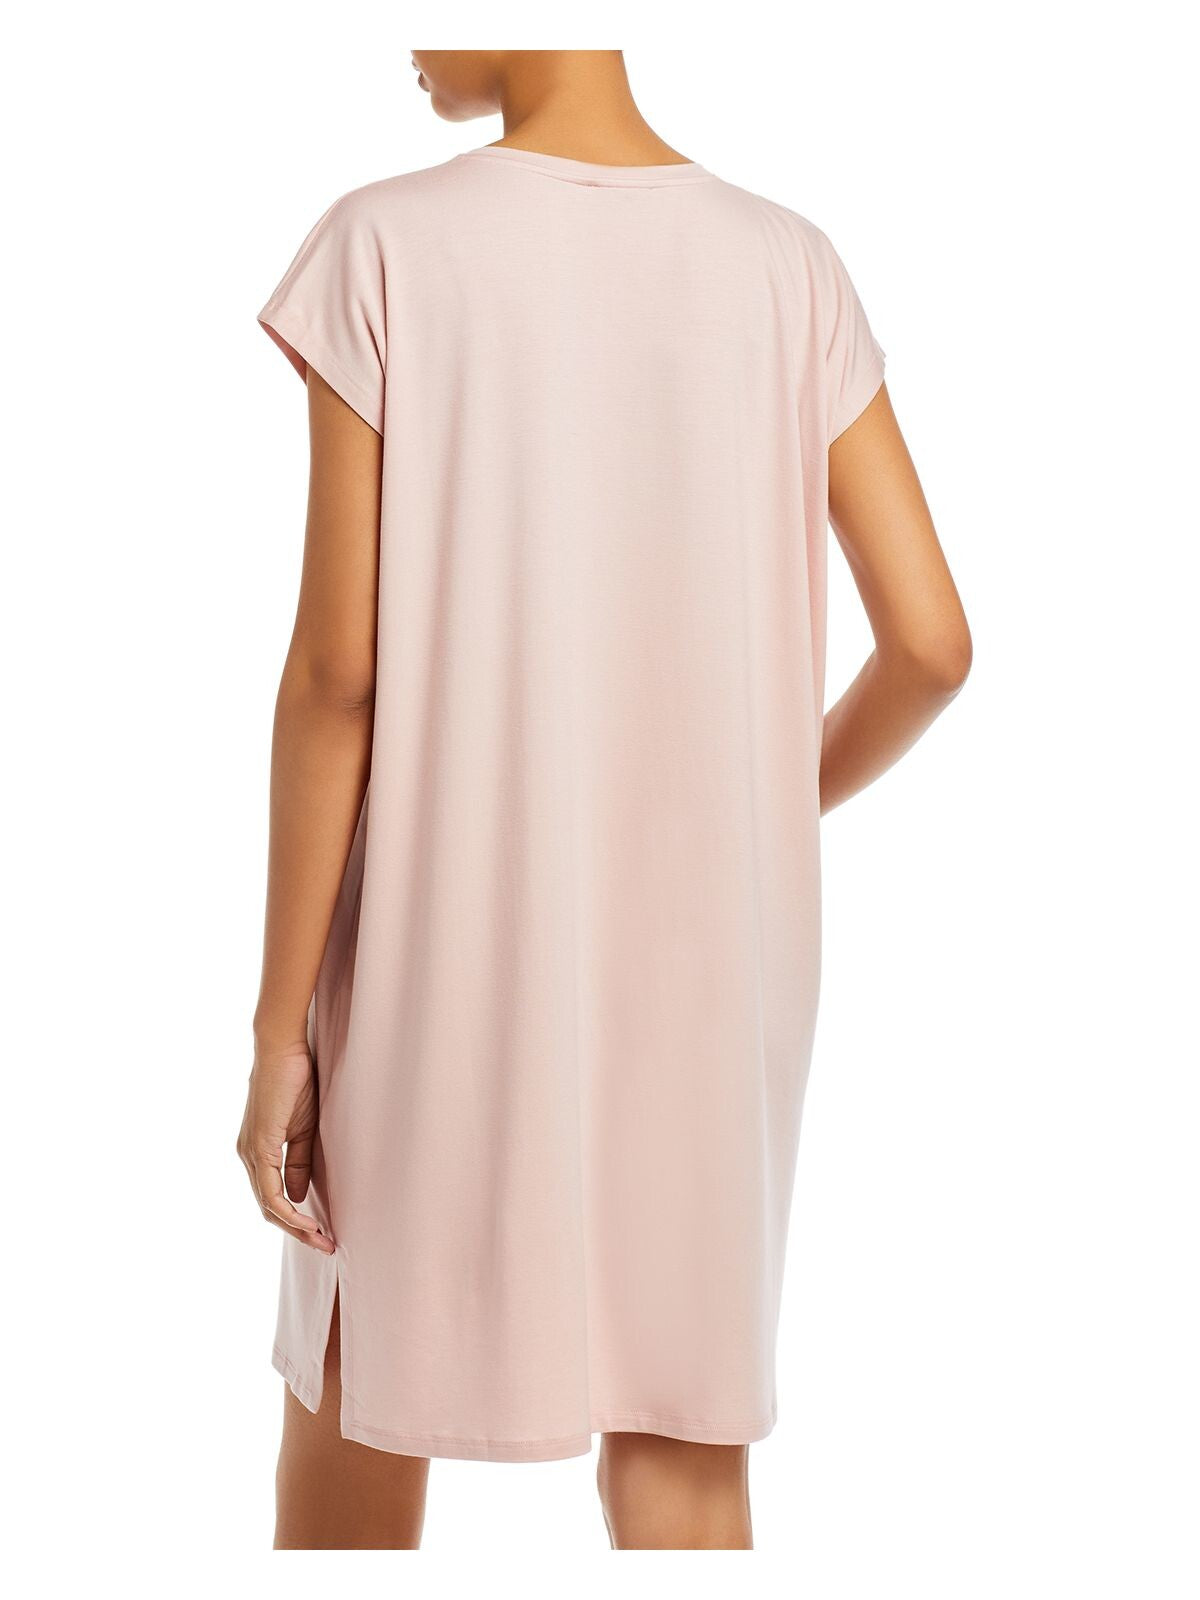 EILEEN FISHER Womens Pink Stretch Cap Sleeve V Neck Above The Knee Shift Dress S